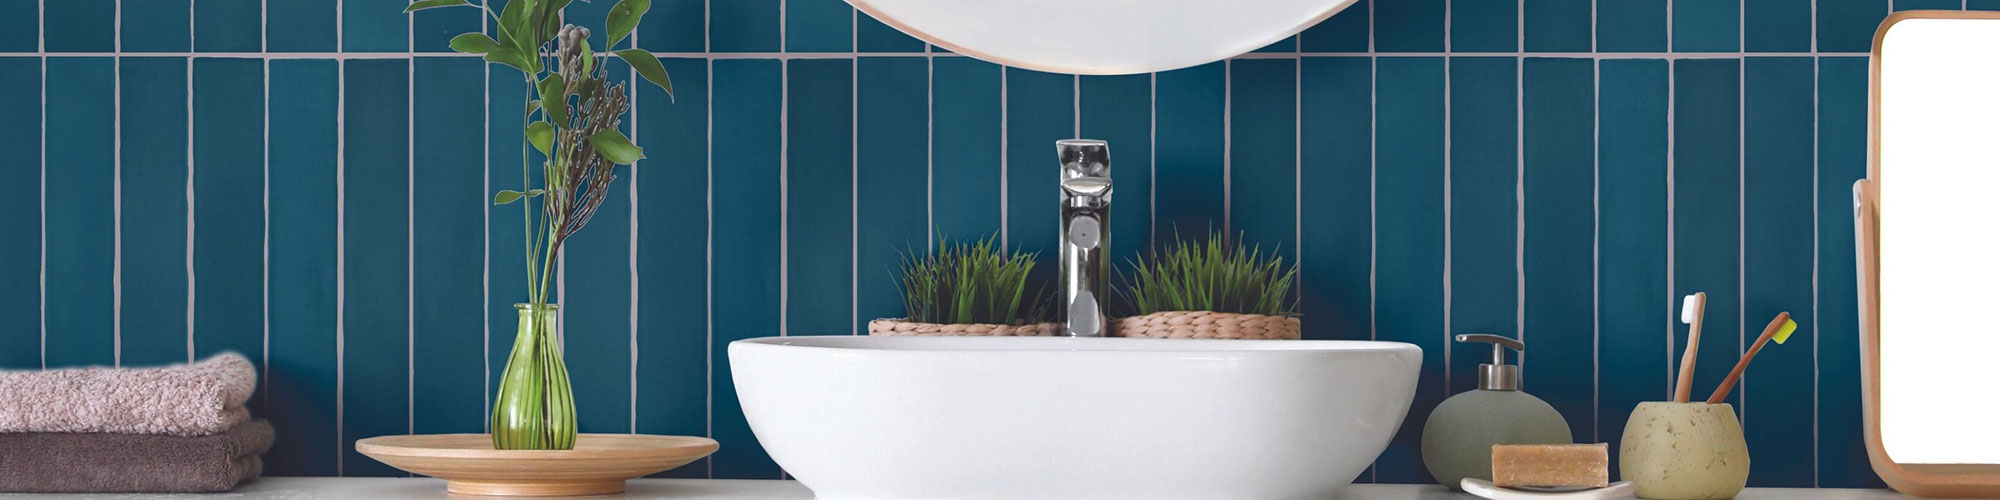 Bathroom vanity with vessel sink, blue tile backsplash laid in a vertical pattern, silver polished faucet, succulents in wicker baskets, soap dispenser and soap dish.